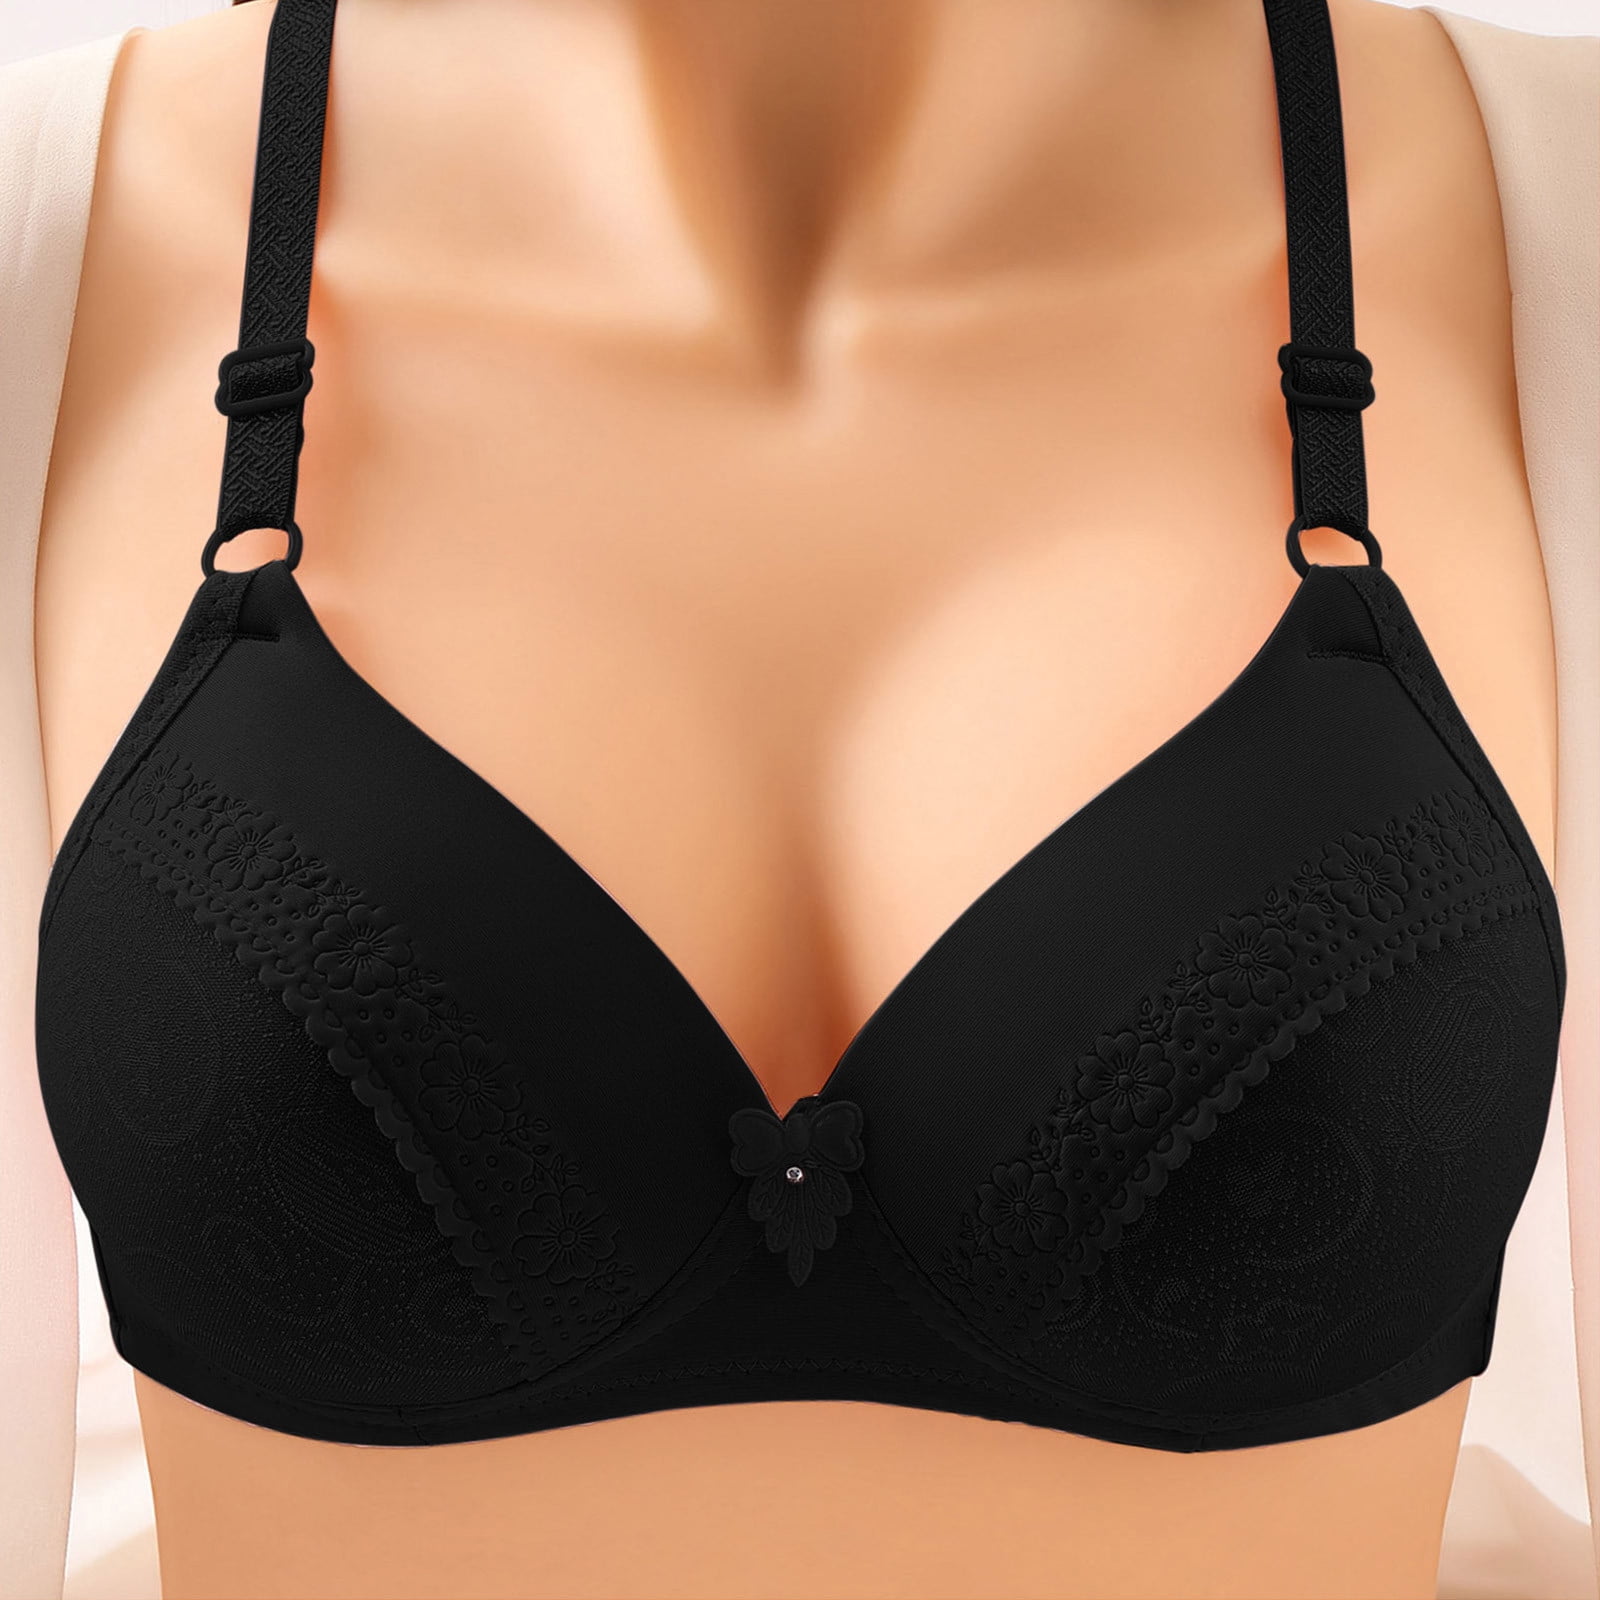 TOWED22 Plus Size Bras,Smooth Wireless Bra for Women, Seamless 360 Degree  Support, Smooth fit no Buldges Black,50A